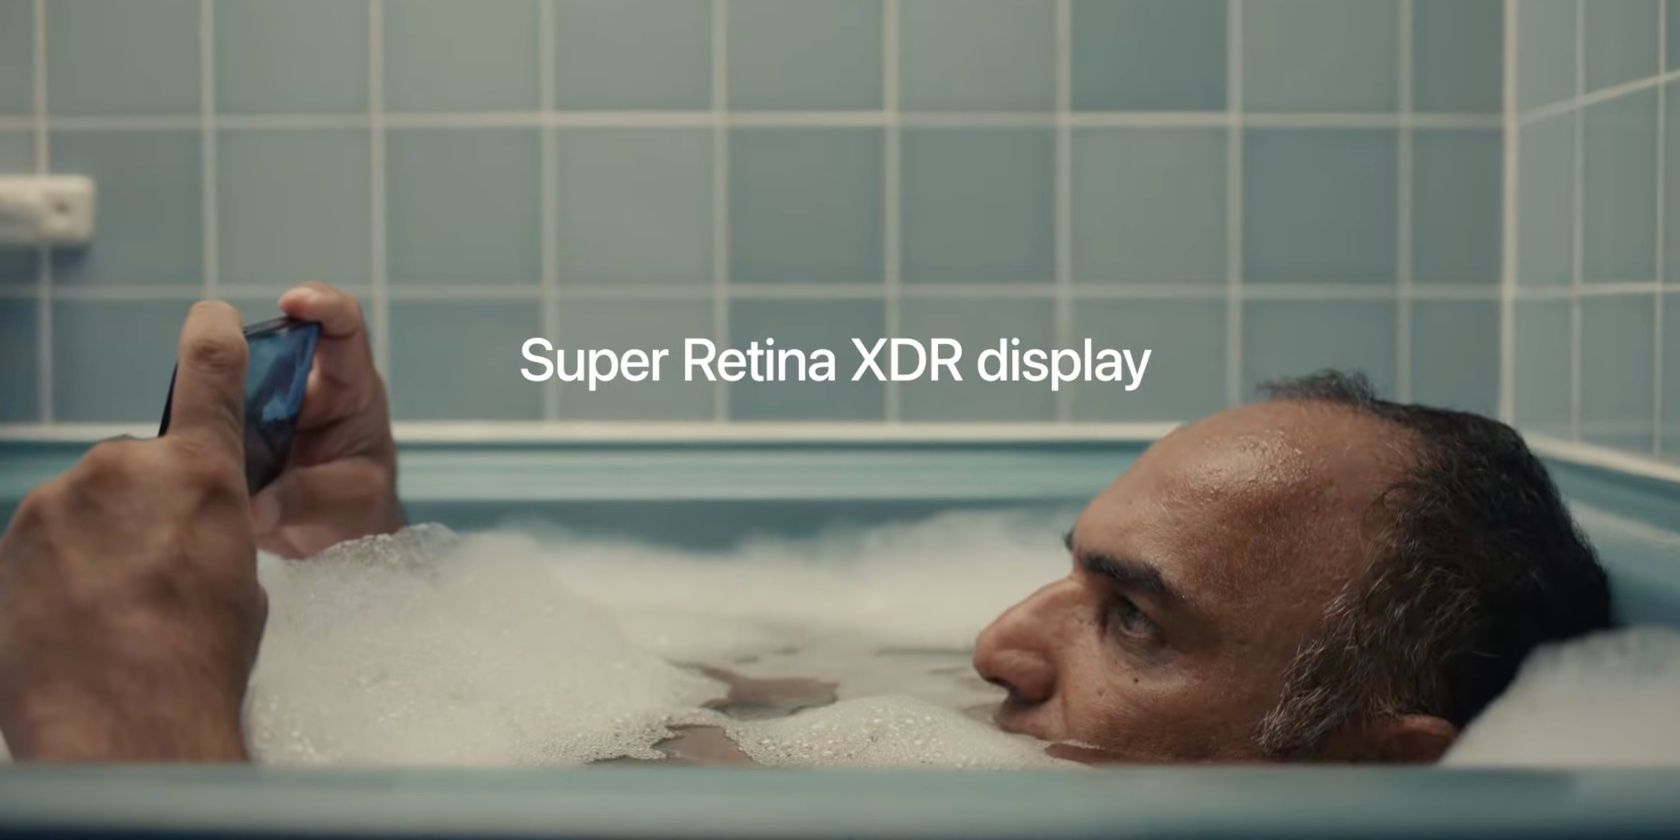 A still from Apple's iPhone 12 ad promoting the Super Retina XDR Display technology